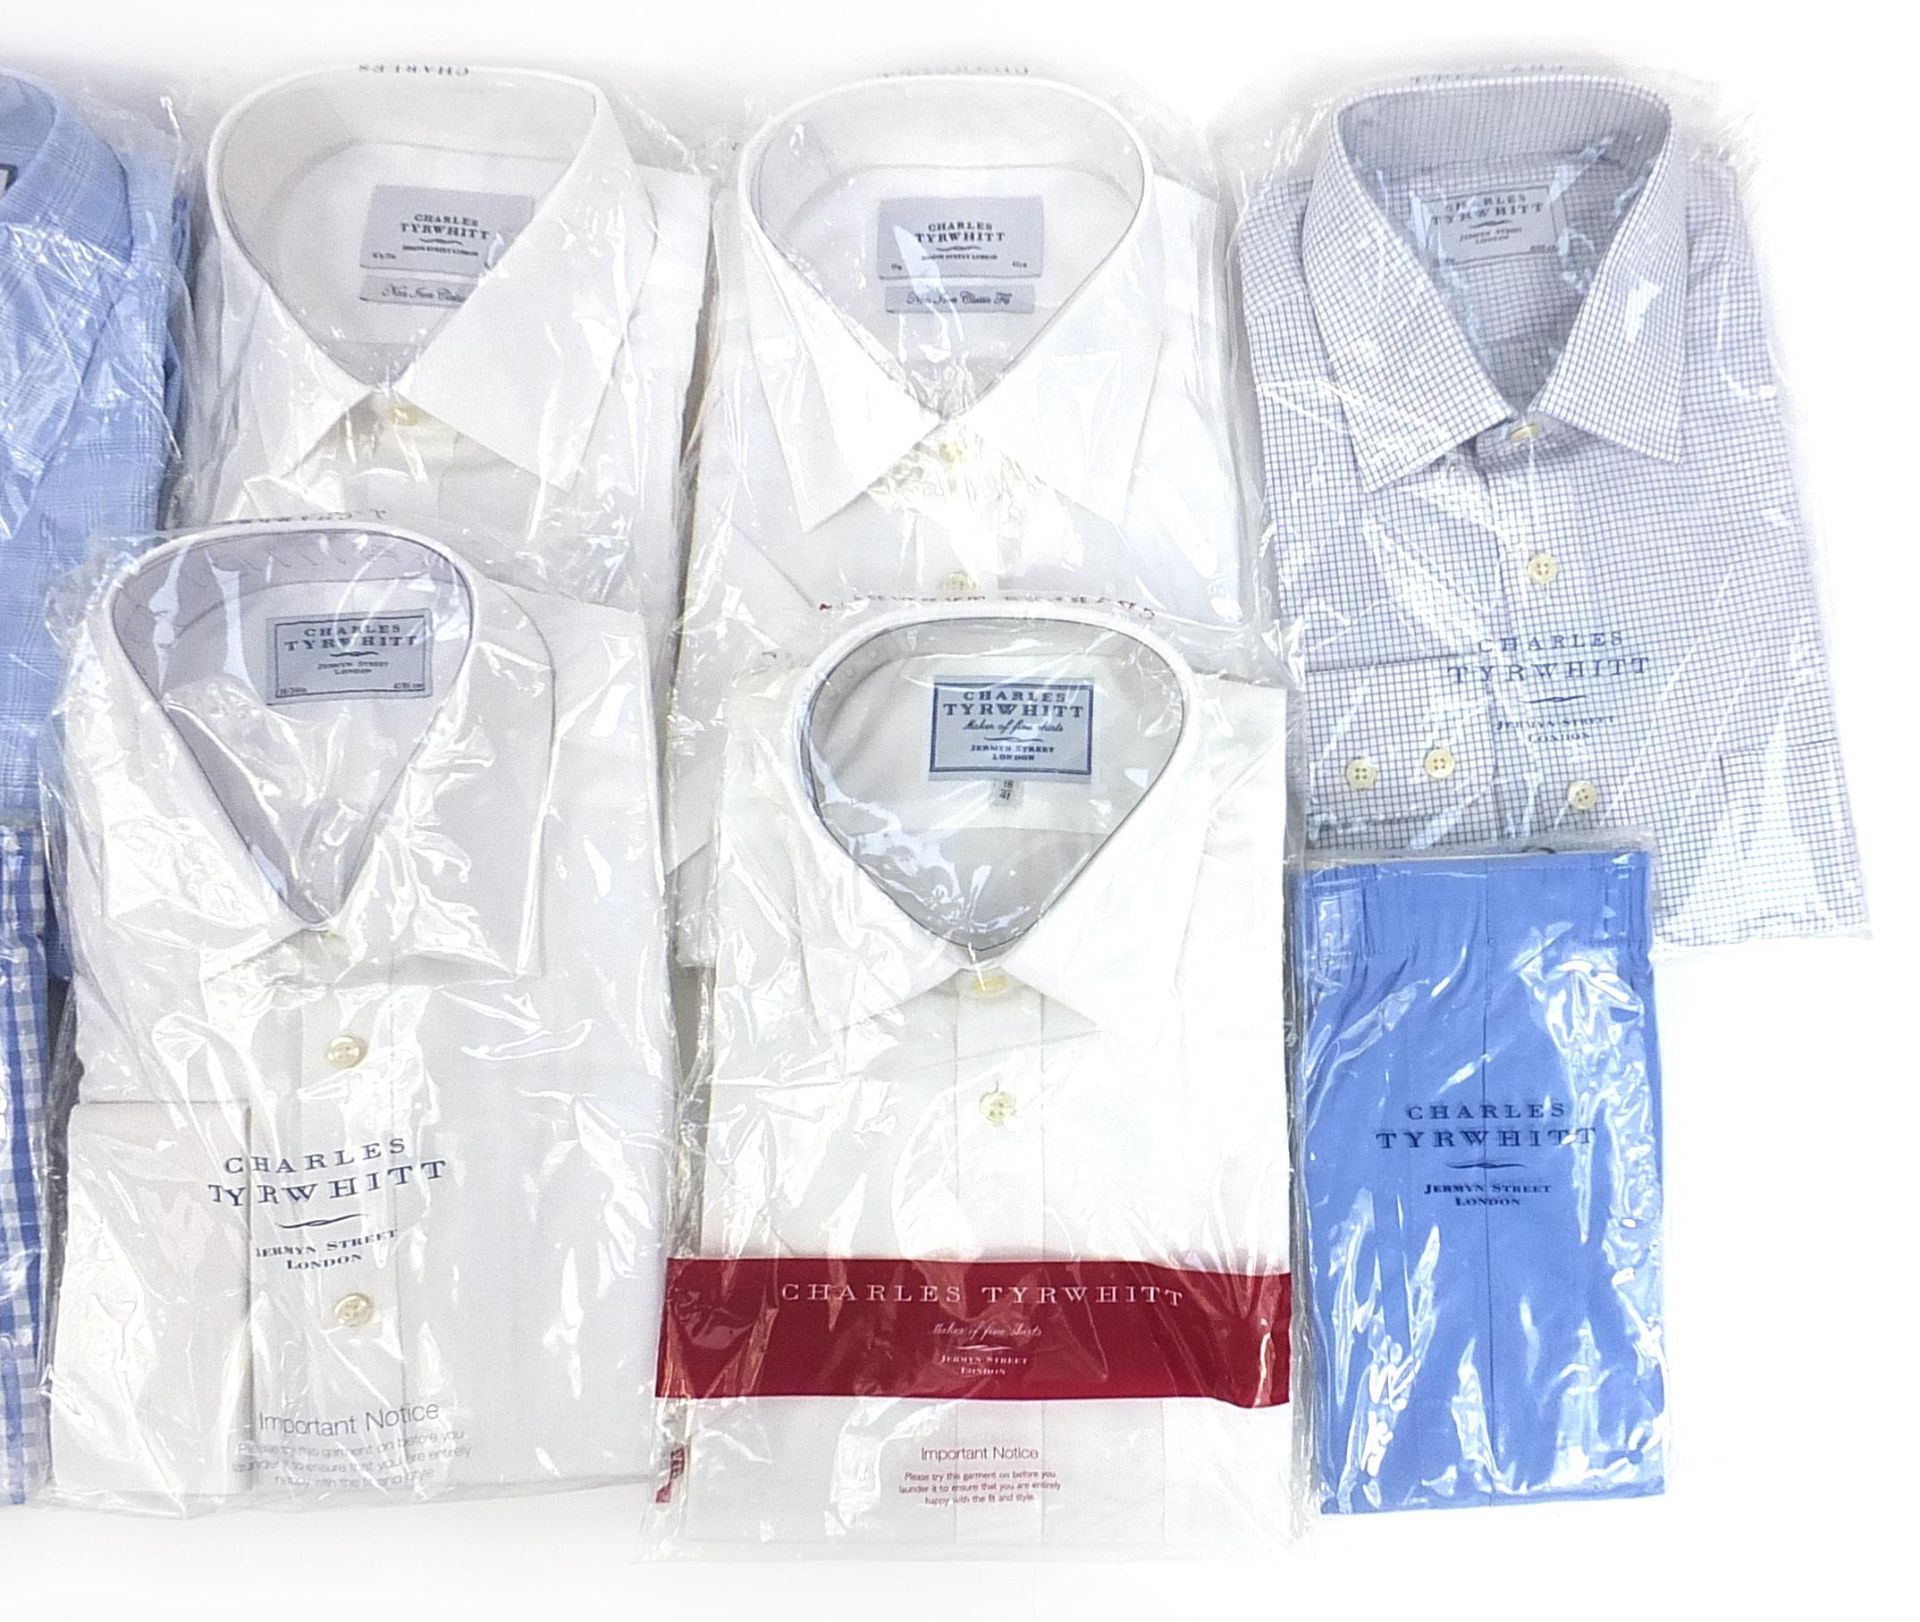 Assorted Charles Tyrwhitt Jermyn Street London unopened shirts including 16 and 16 1/2 and two pairs - Bild 3 aus 3